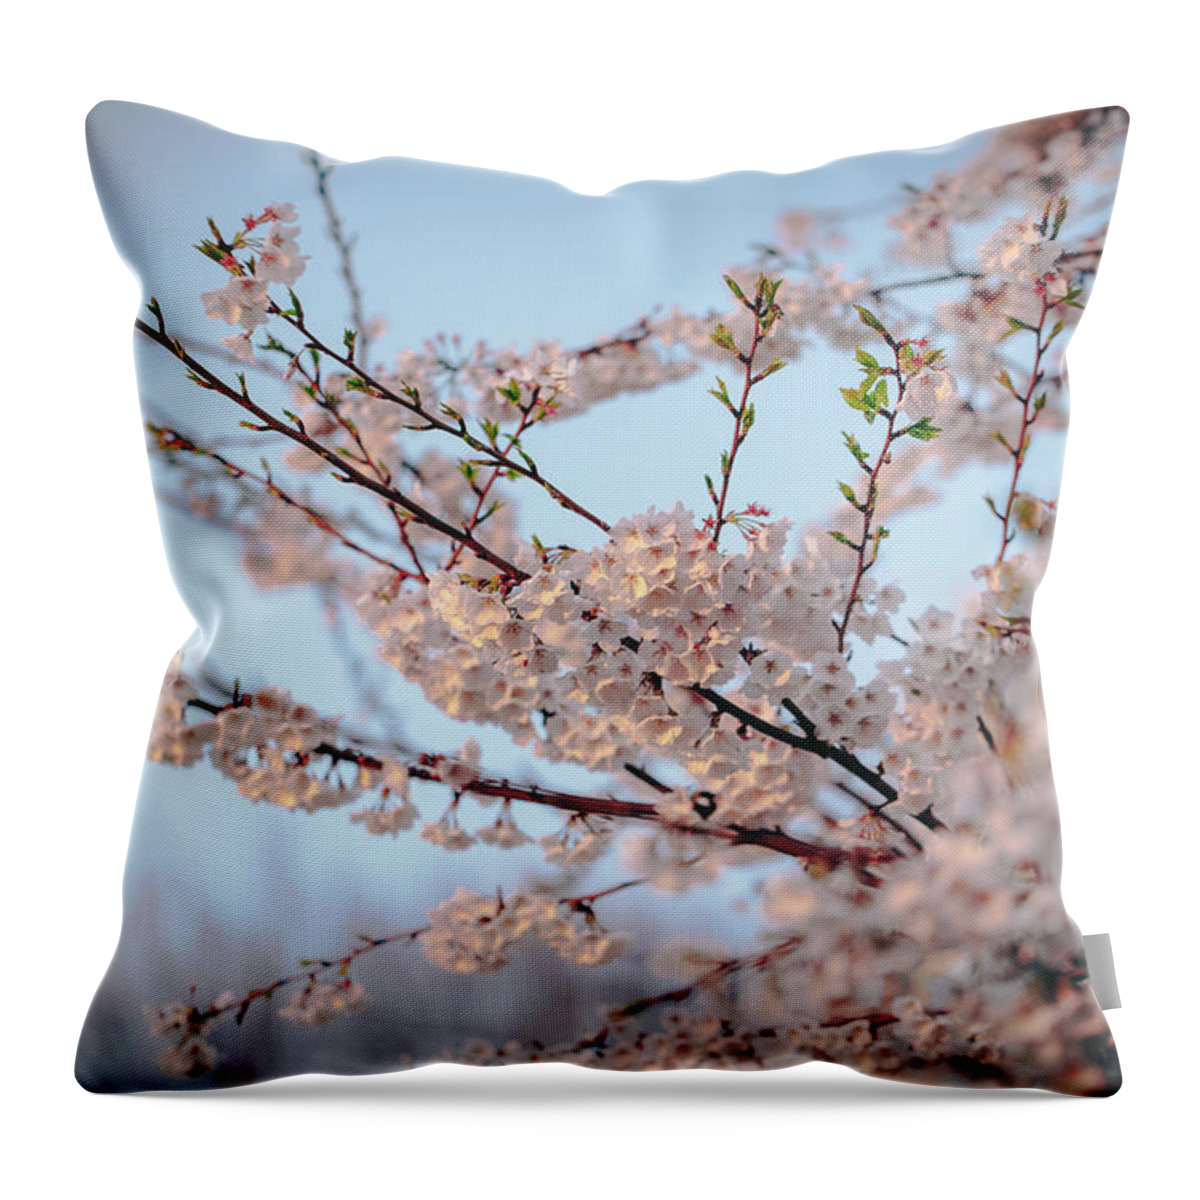 2014 Throw Pillow featuring the photograph Cherry Blossoms by Amber Flowers